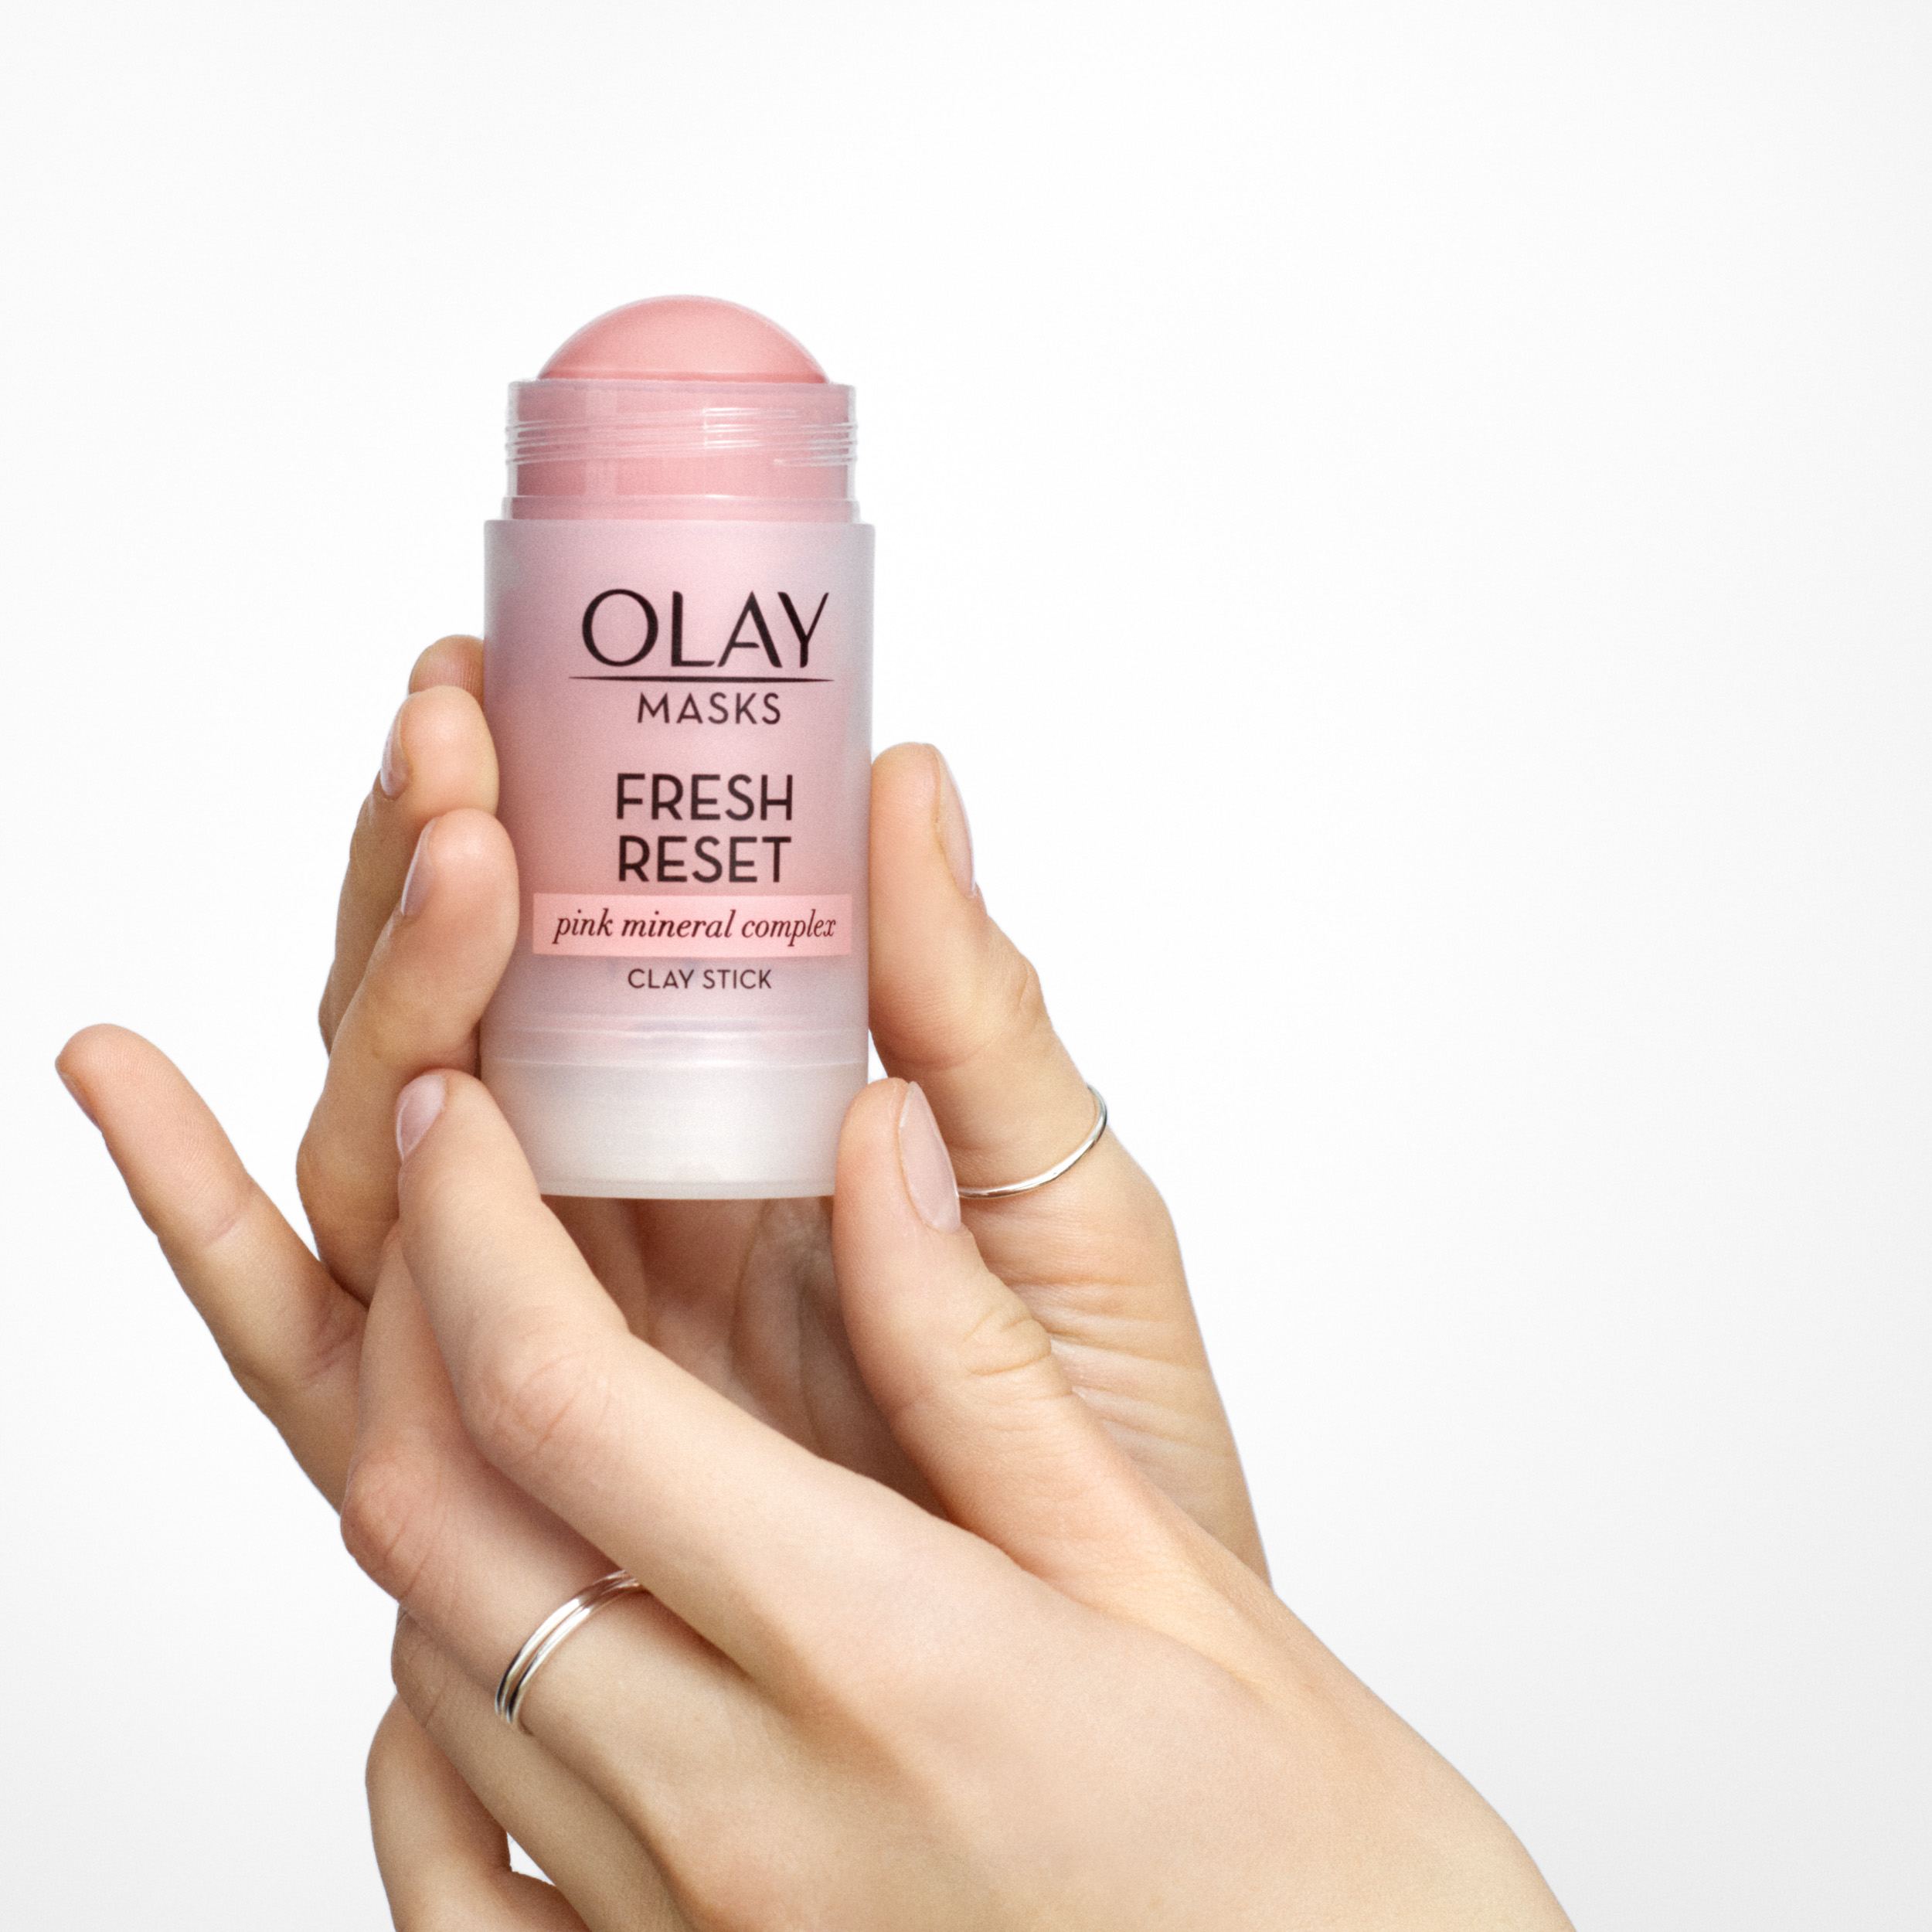 Olay Face Mask Stick, Fresh Reset, Pink Mineral Clay Complex, 1.7 oz - image 6 of 12